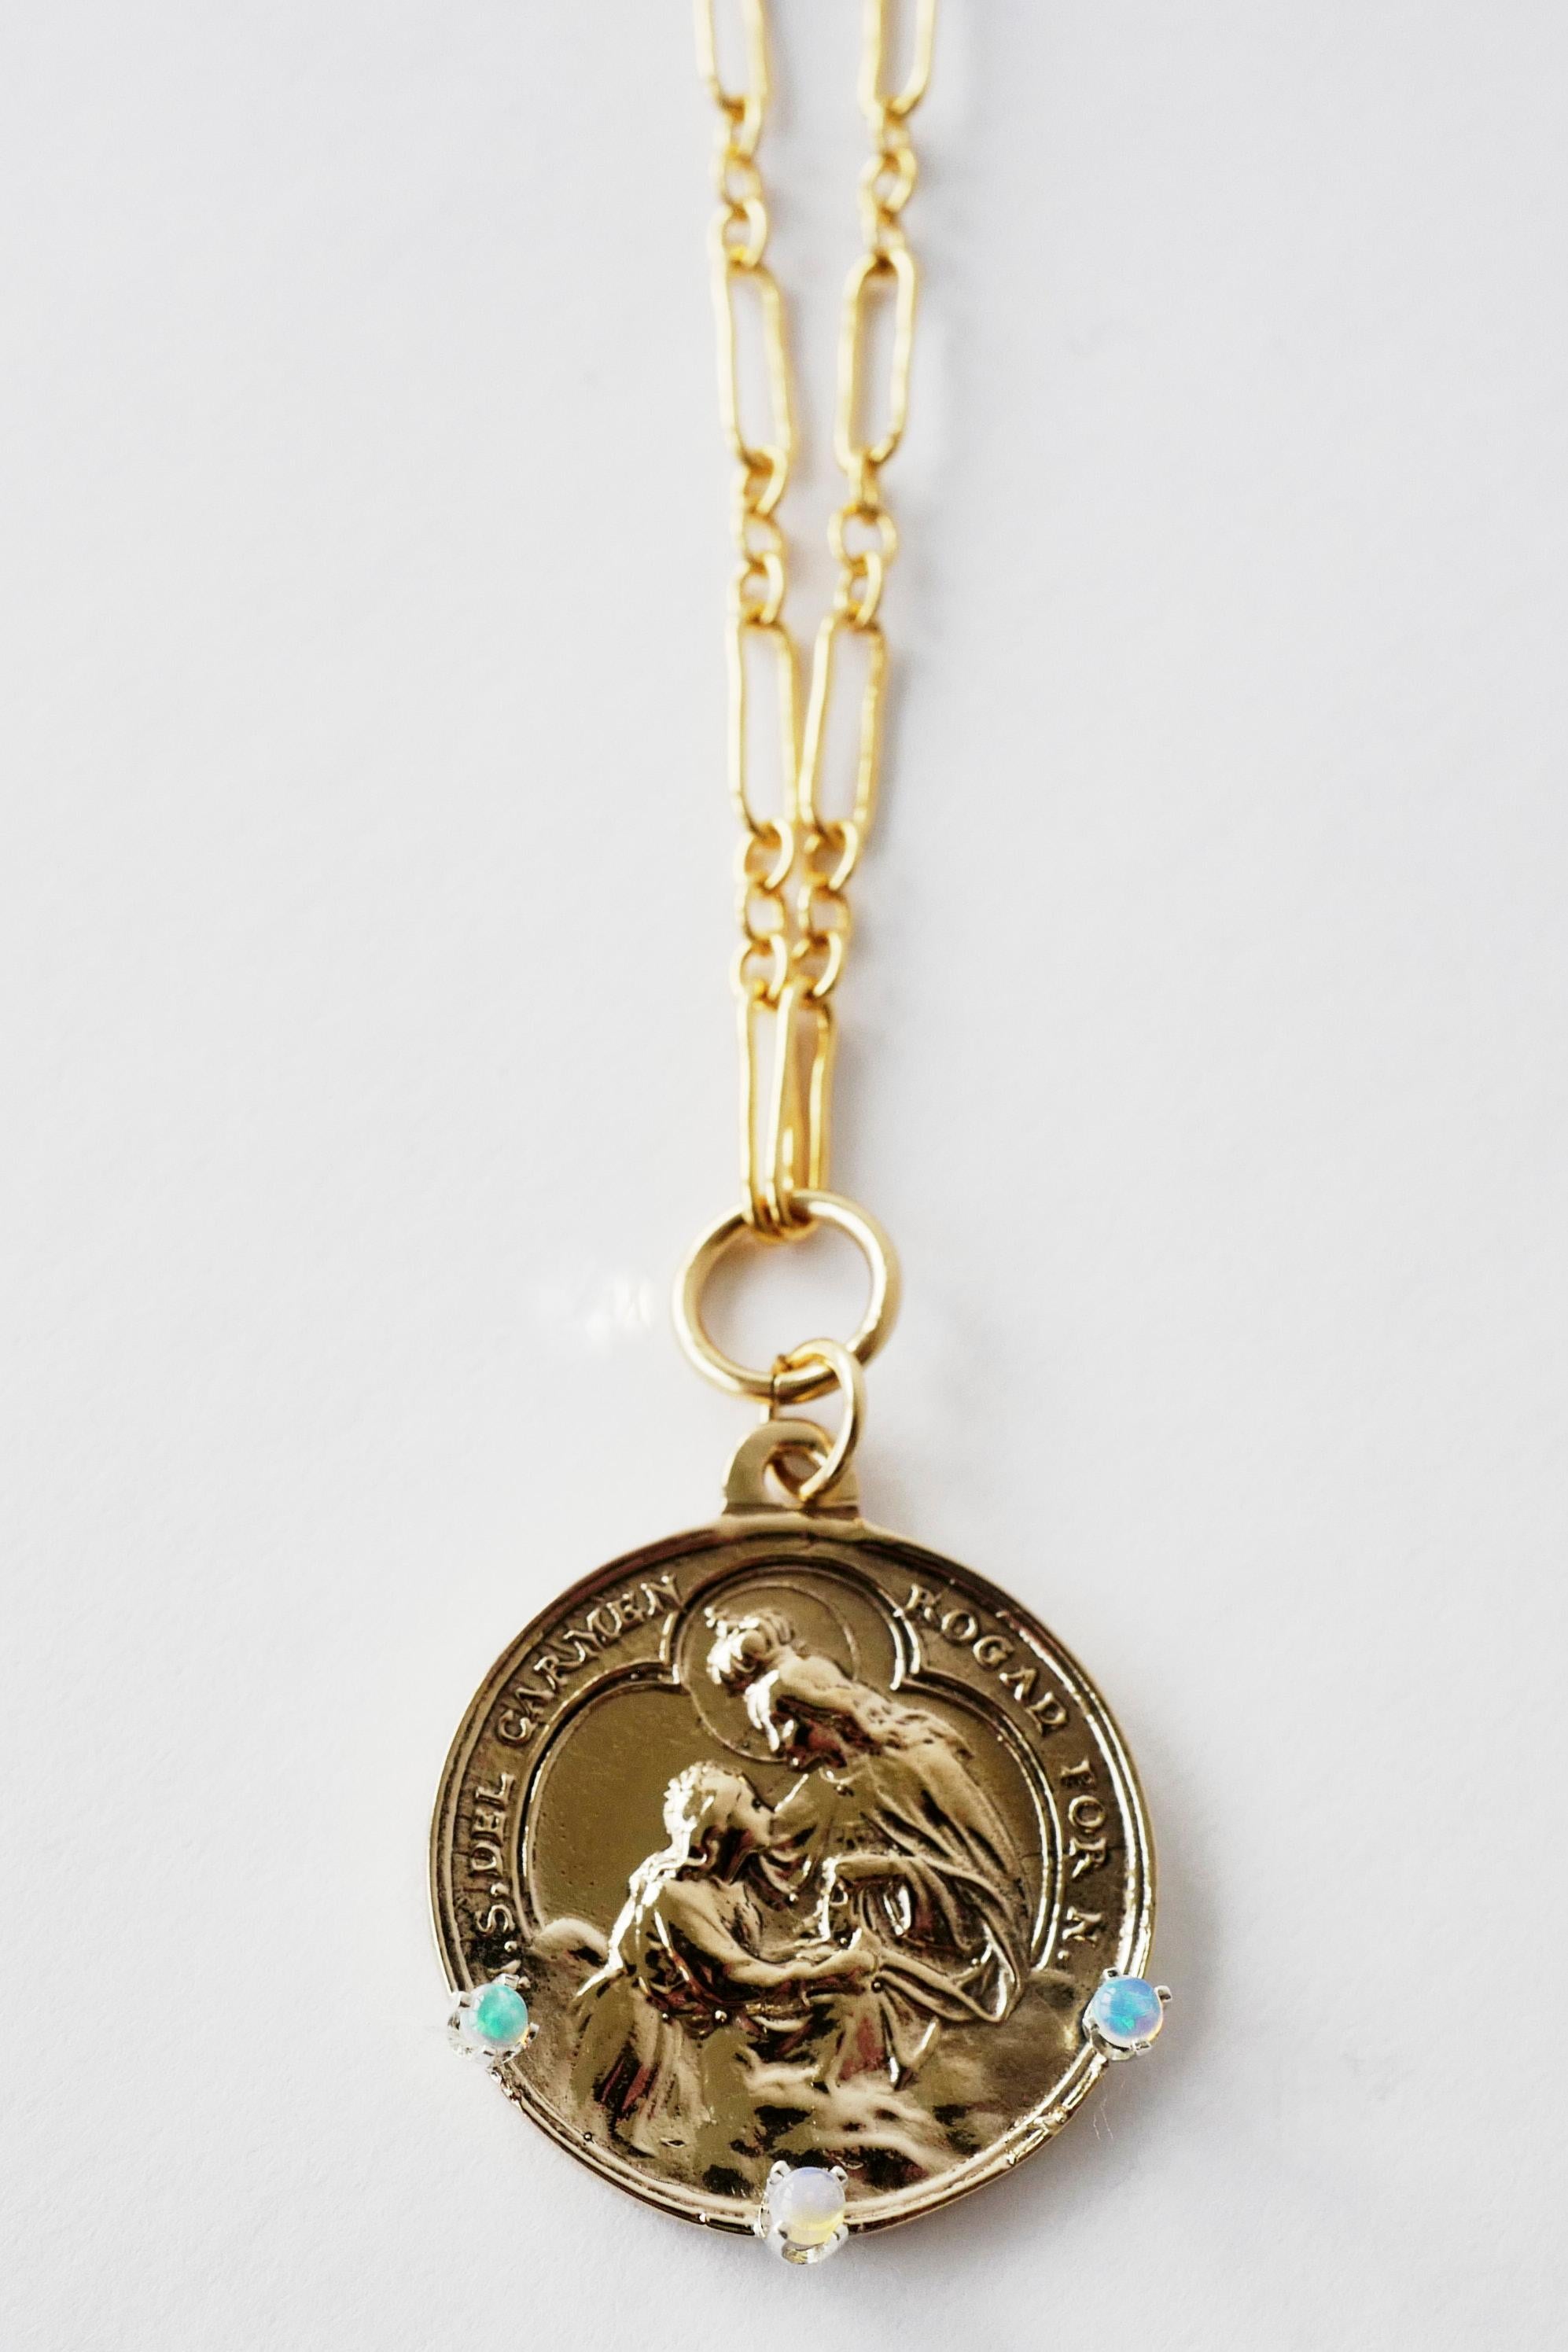 Opal Medal Long Chain Necklace Virgin Mary Pendant Gold Vermeil J Dauphin For Sale 2